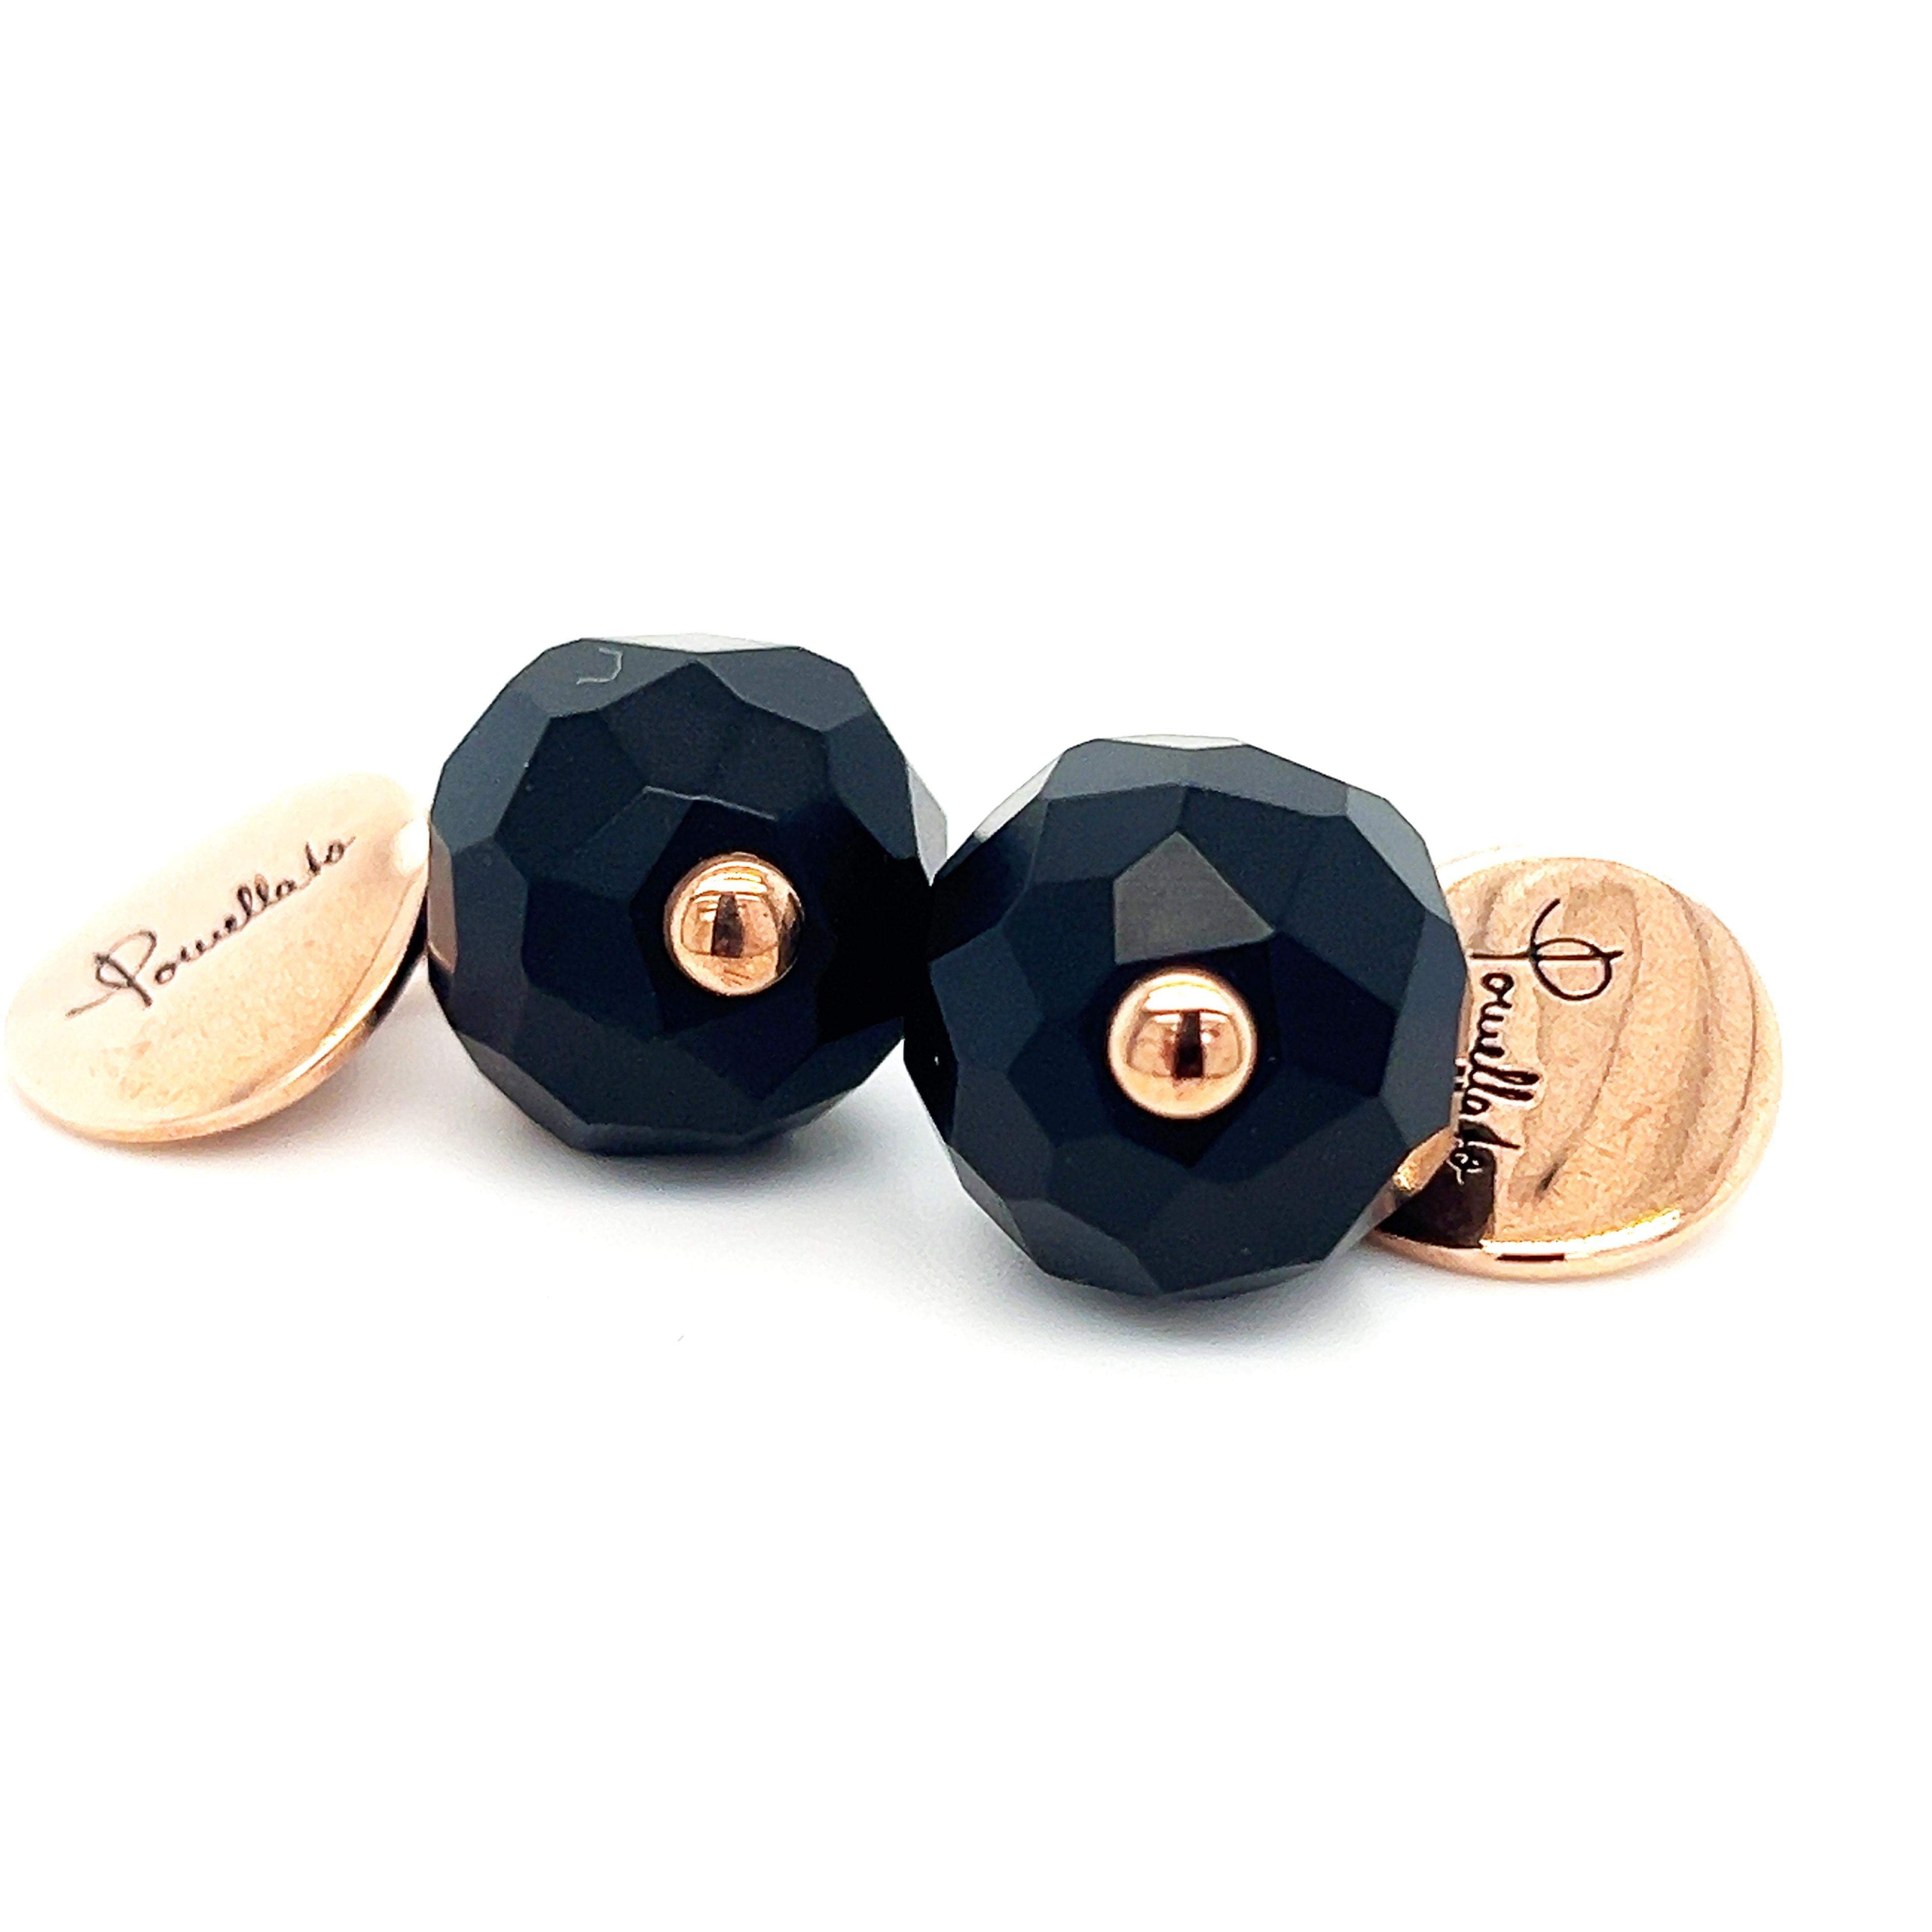 Original 2012 Iconic Pomellato Victoria Jet Faceted Ball Rose Gold Cufflinks For Sale 2